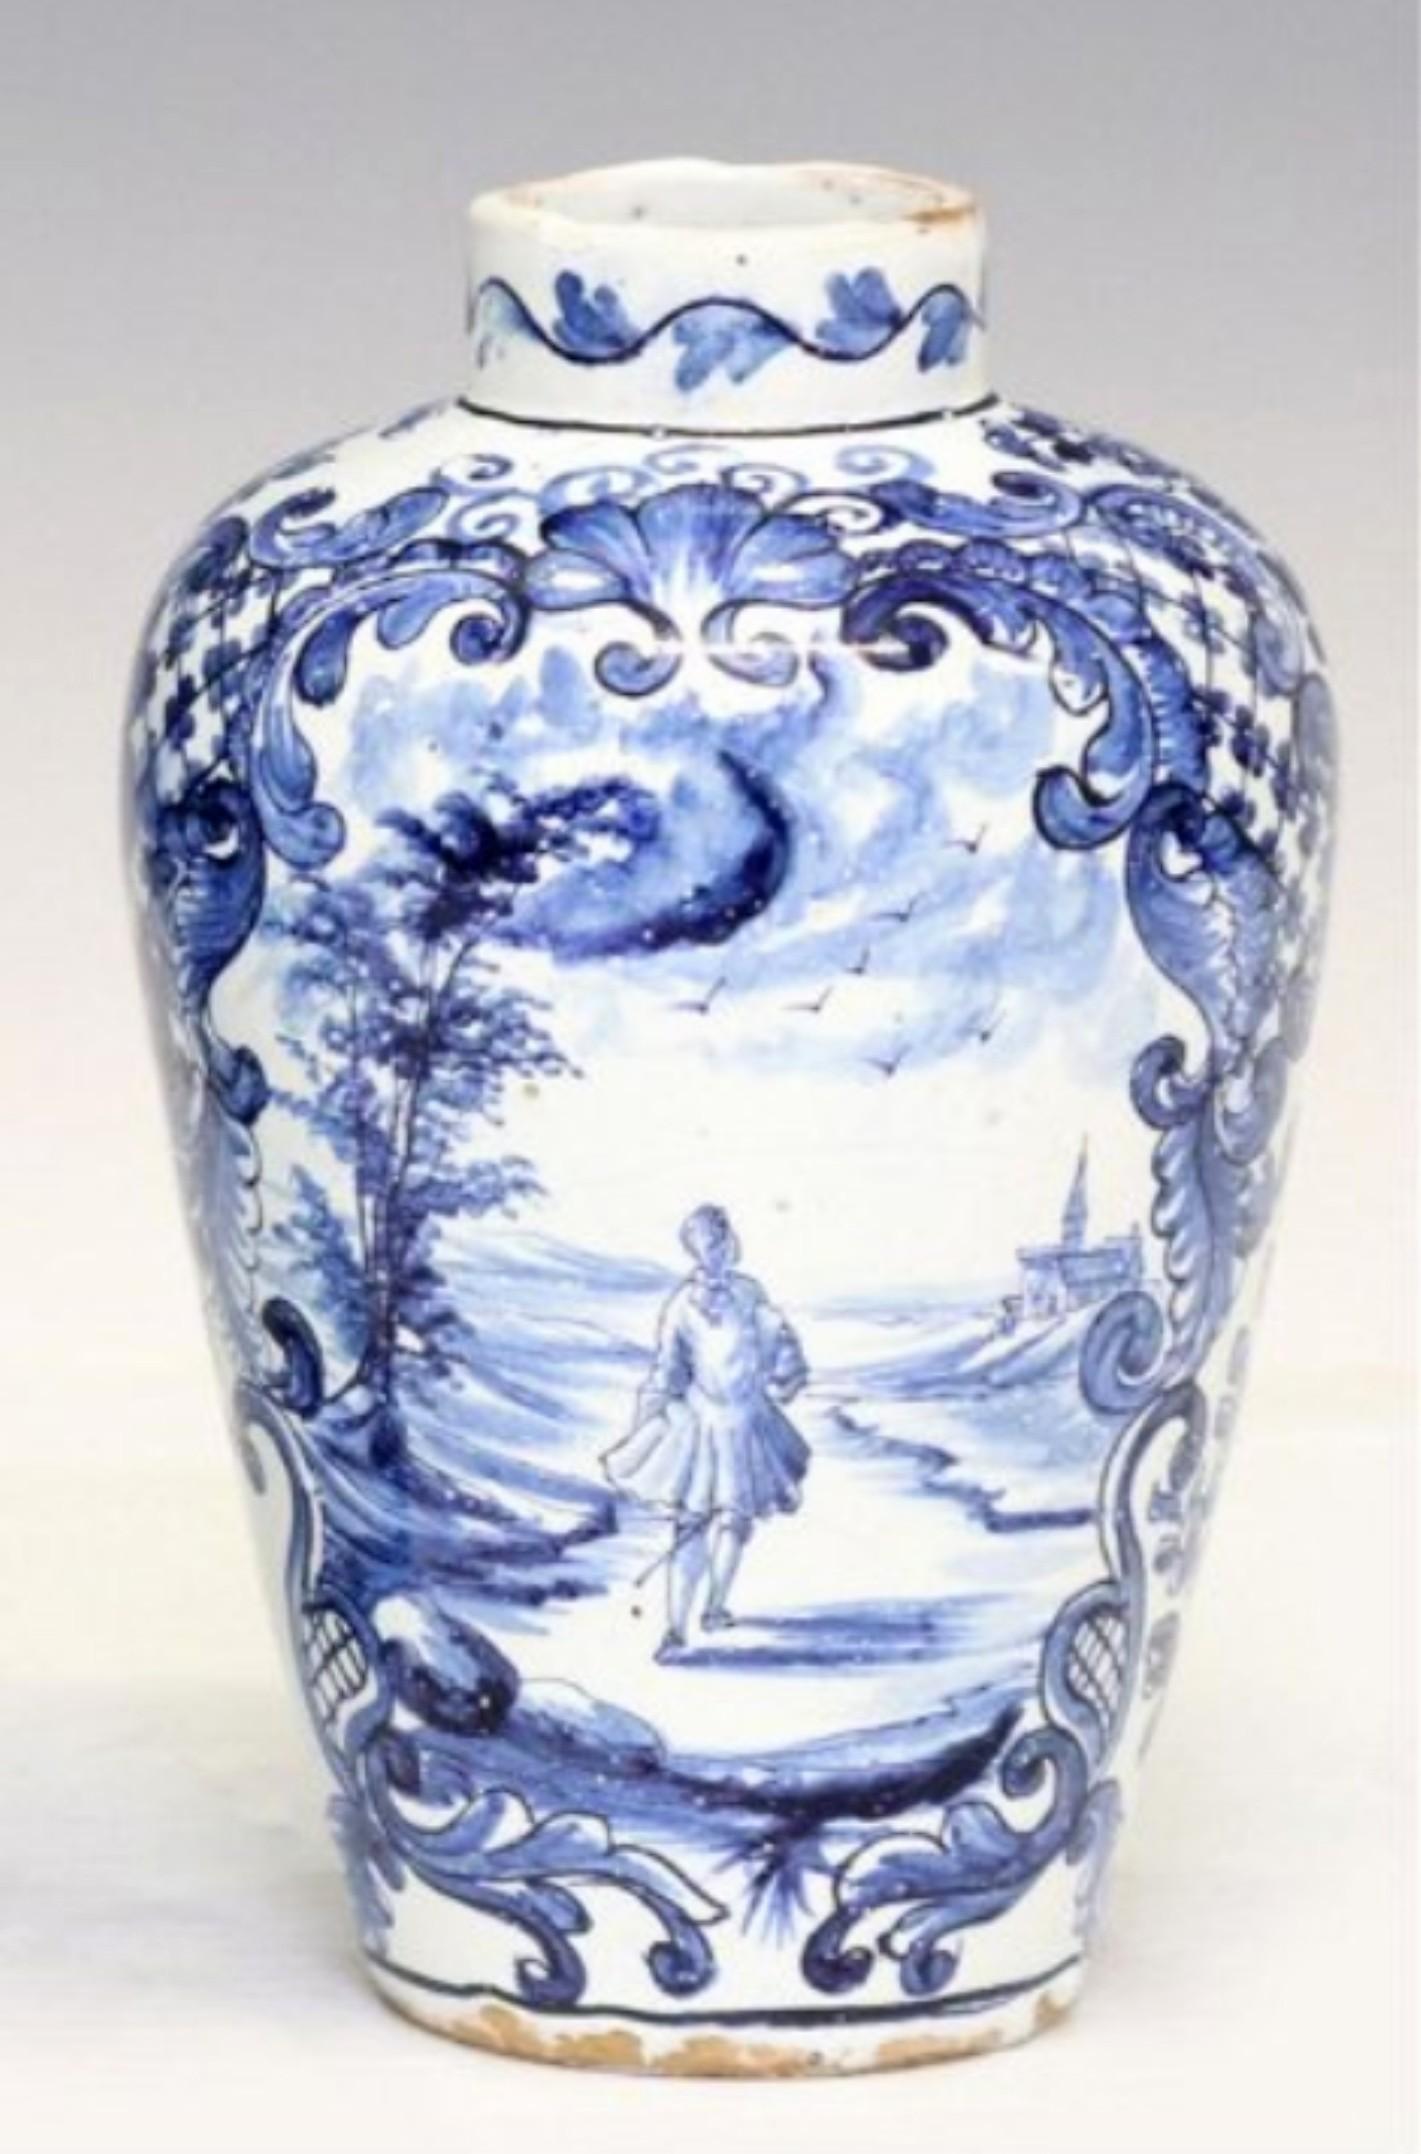 18th Century Dutch Chinoiserie Delft Tin-glazed Earthenware Vase Garniture Set In Fair Condition For Sale In Forney, TX